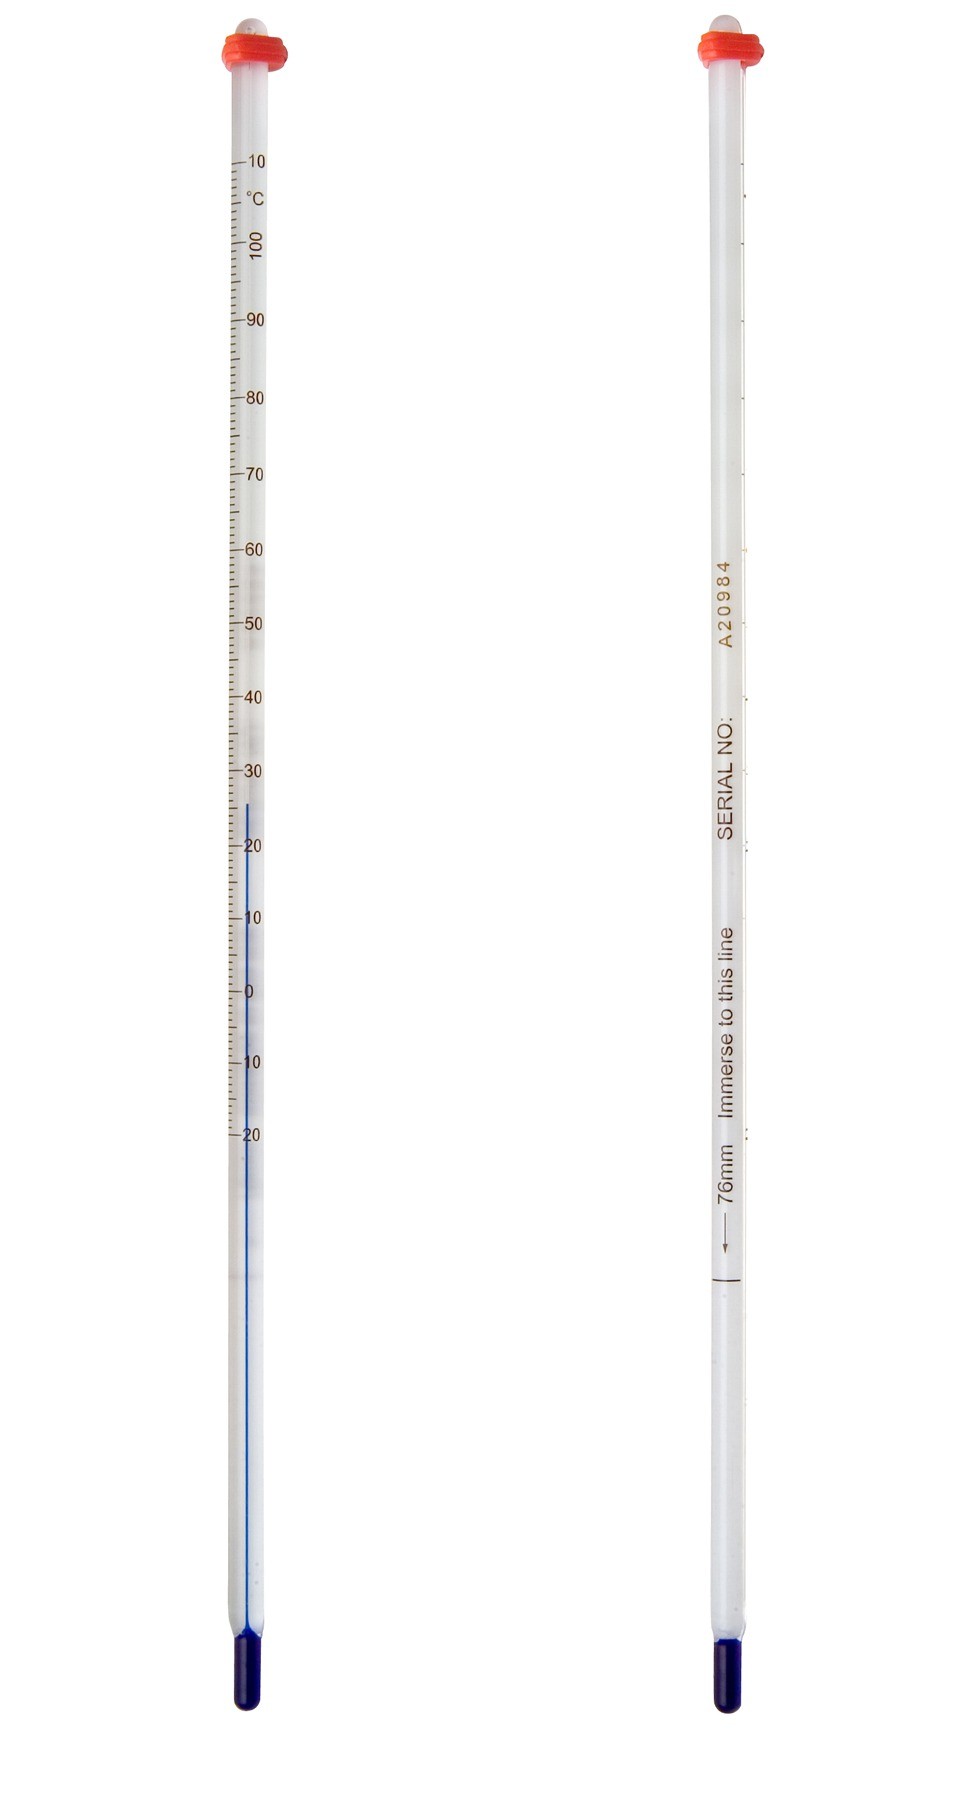 parts of a laboratory thermometer